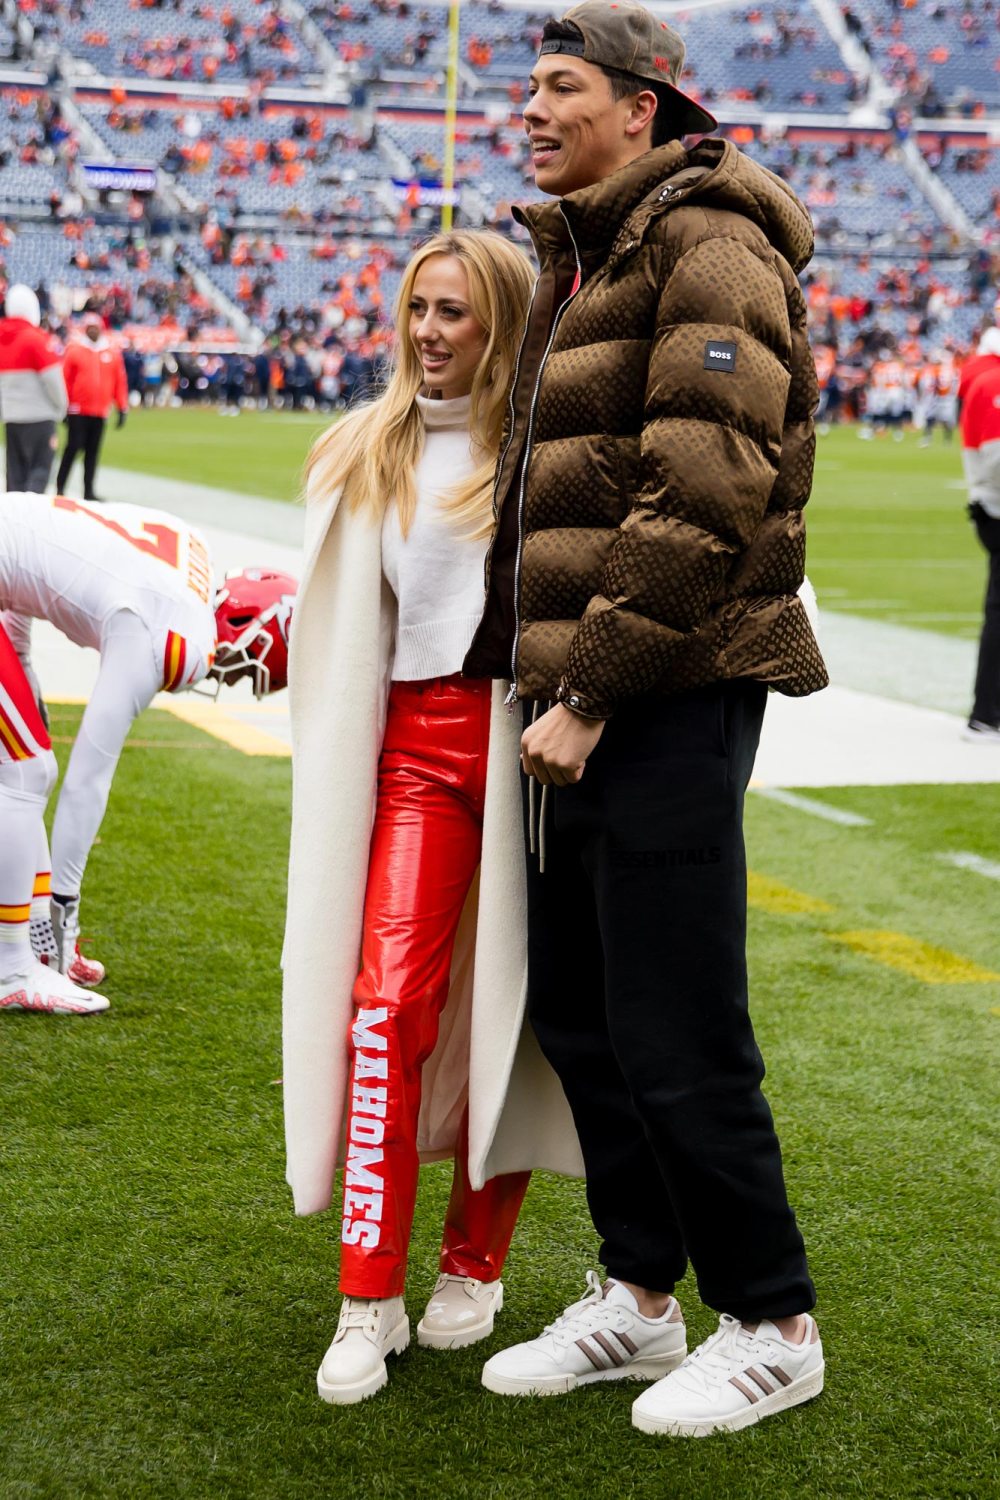 Chic Winter Game Ensemble: Brittany Mahomes Stuns in Cream Coat and Red Leather Pants at Chiefs Match - amazingdailynews.com